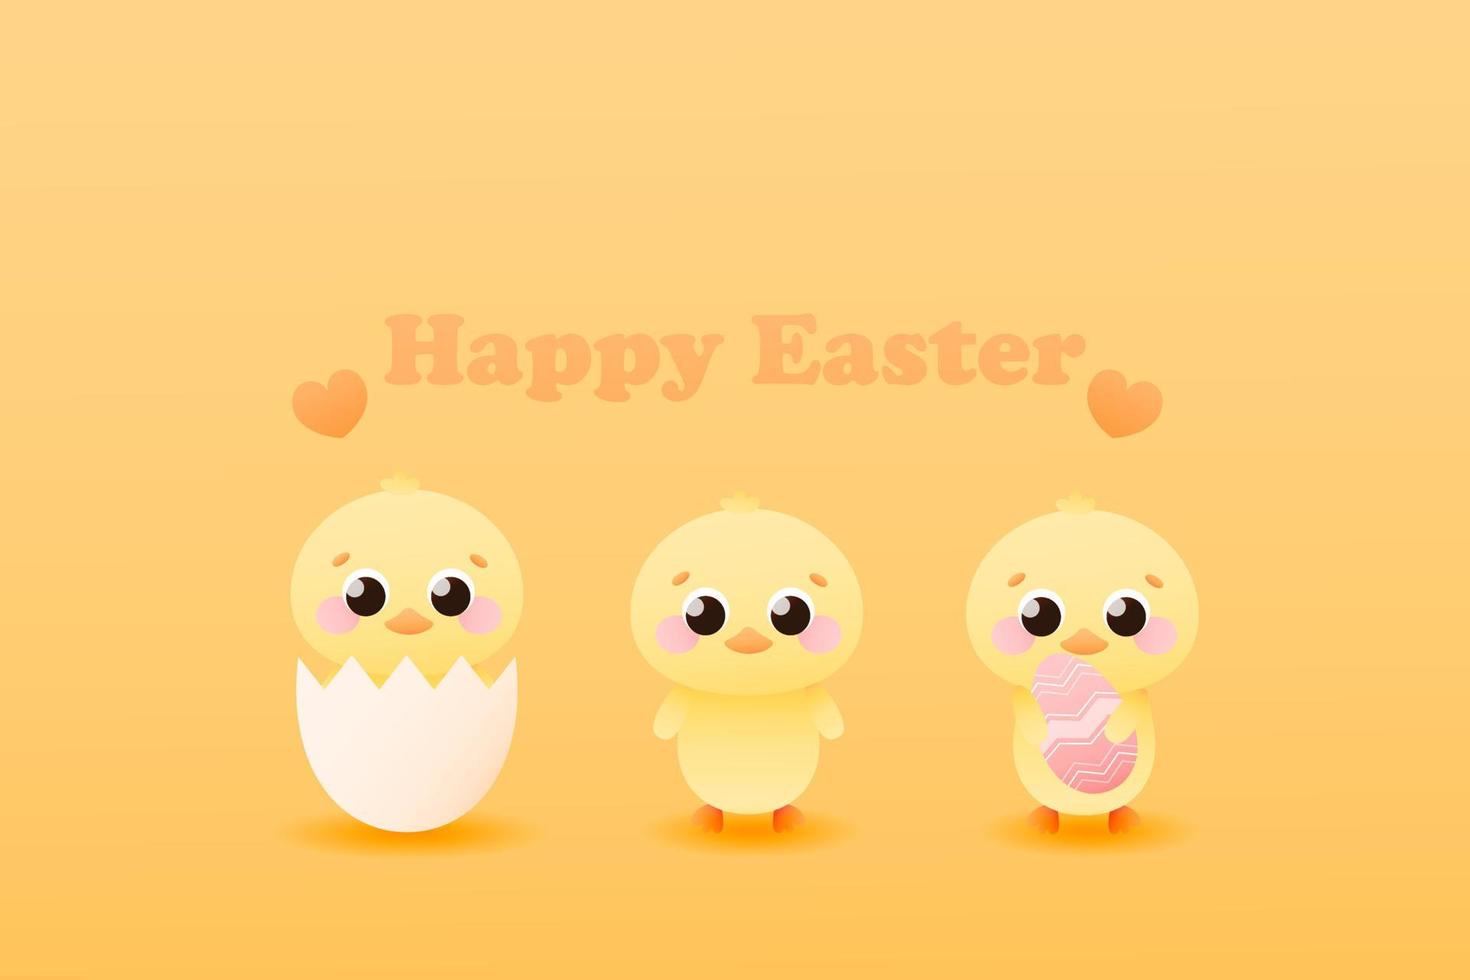 Happy easter banner with cute animal characters - chiks in shell and holding gaint painted egg, childish greeting card on yellow background in cartoon style vector